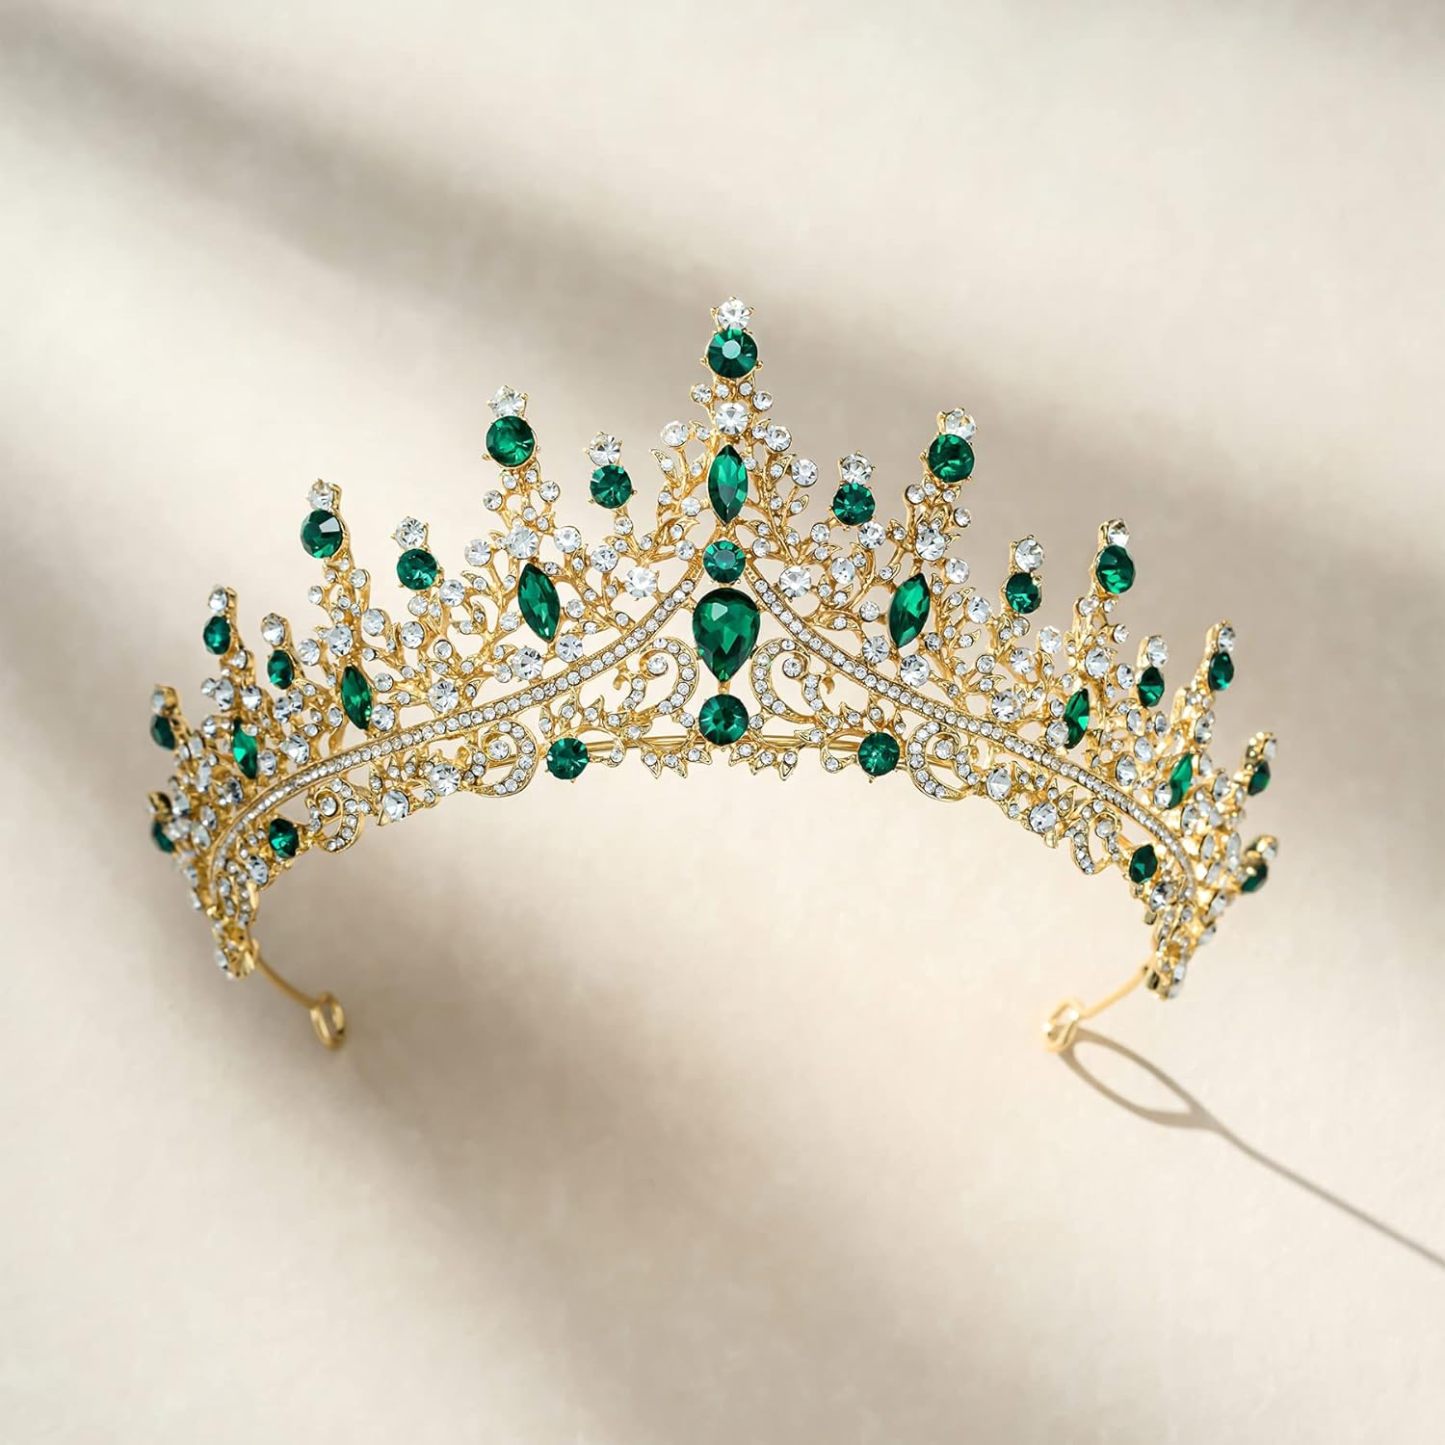 Green Gold Tiara Crown for Women Girls,Queen Crown Princess Diadem,Crystal Hair Accessories for Quinceanera Pageant Prom Birthday,Audrey